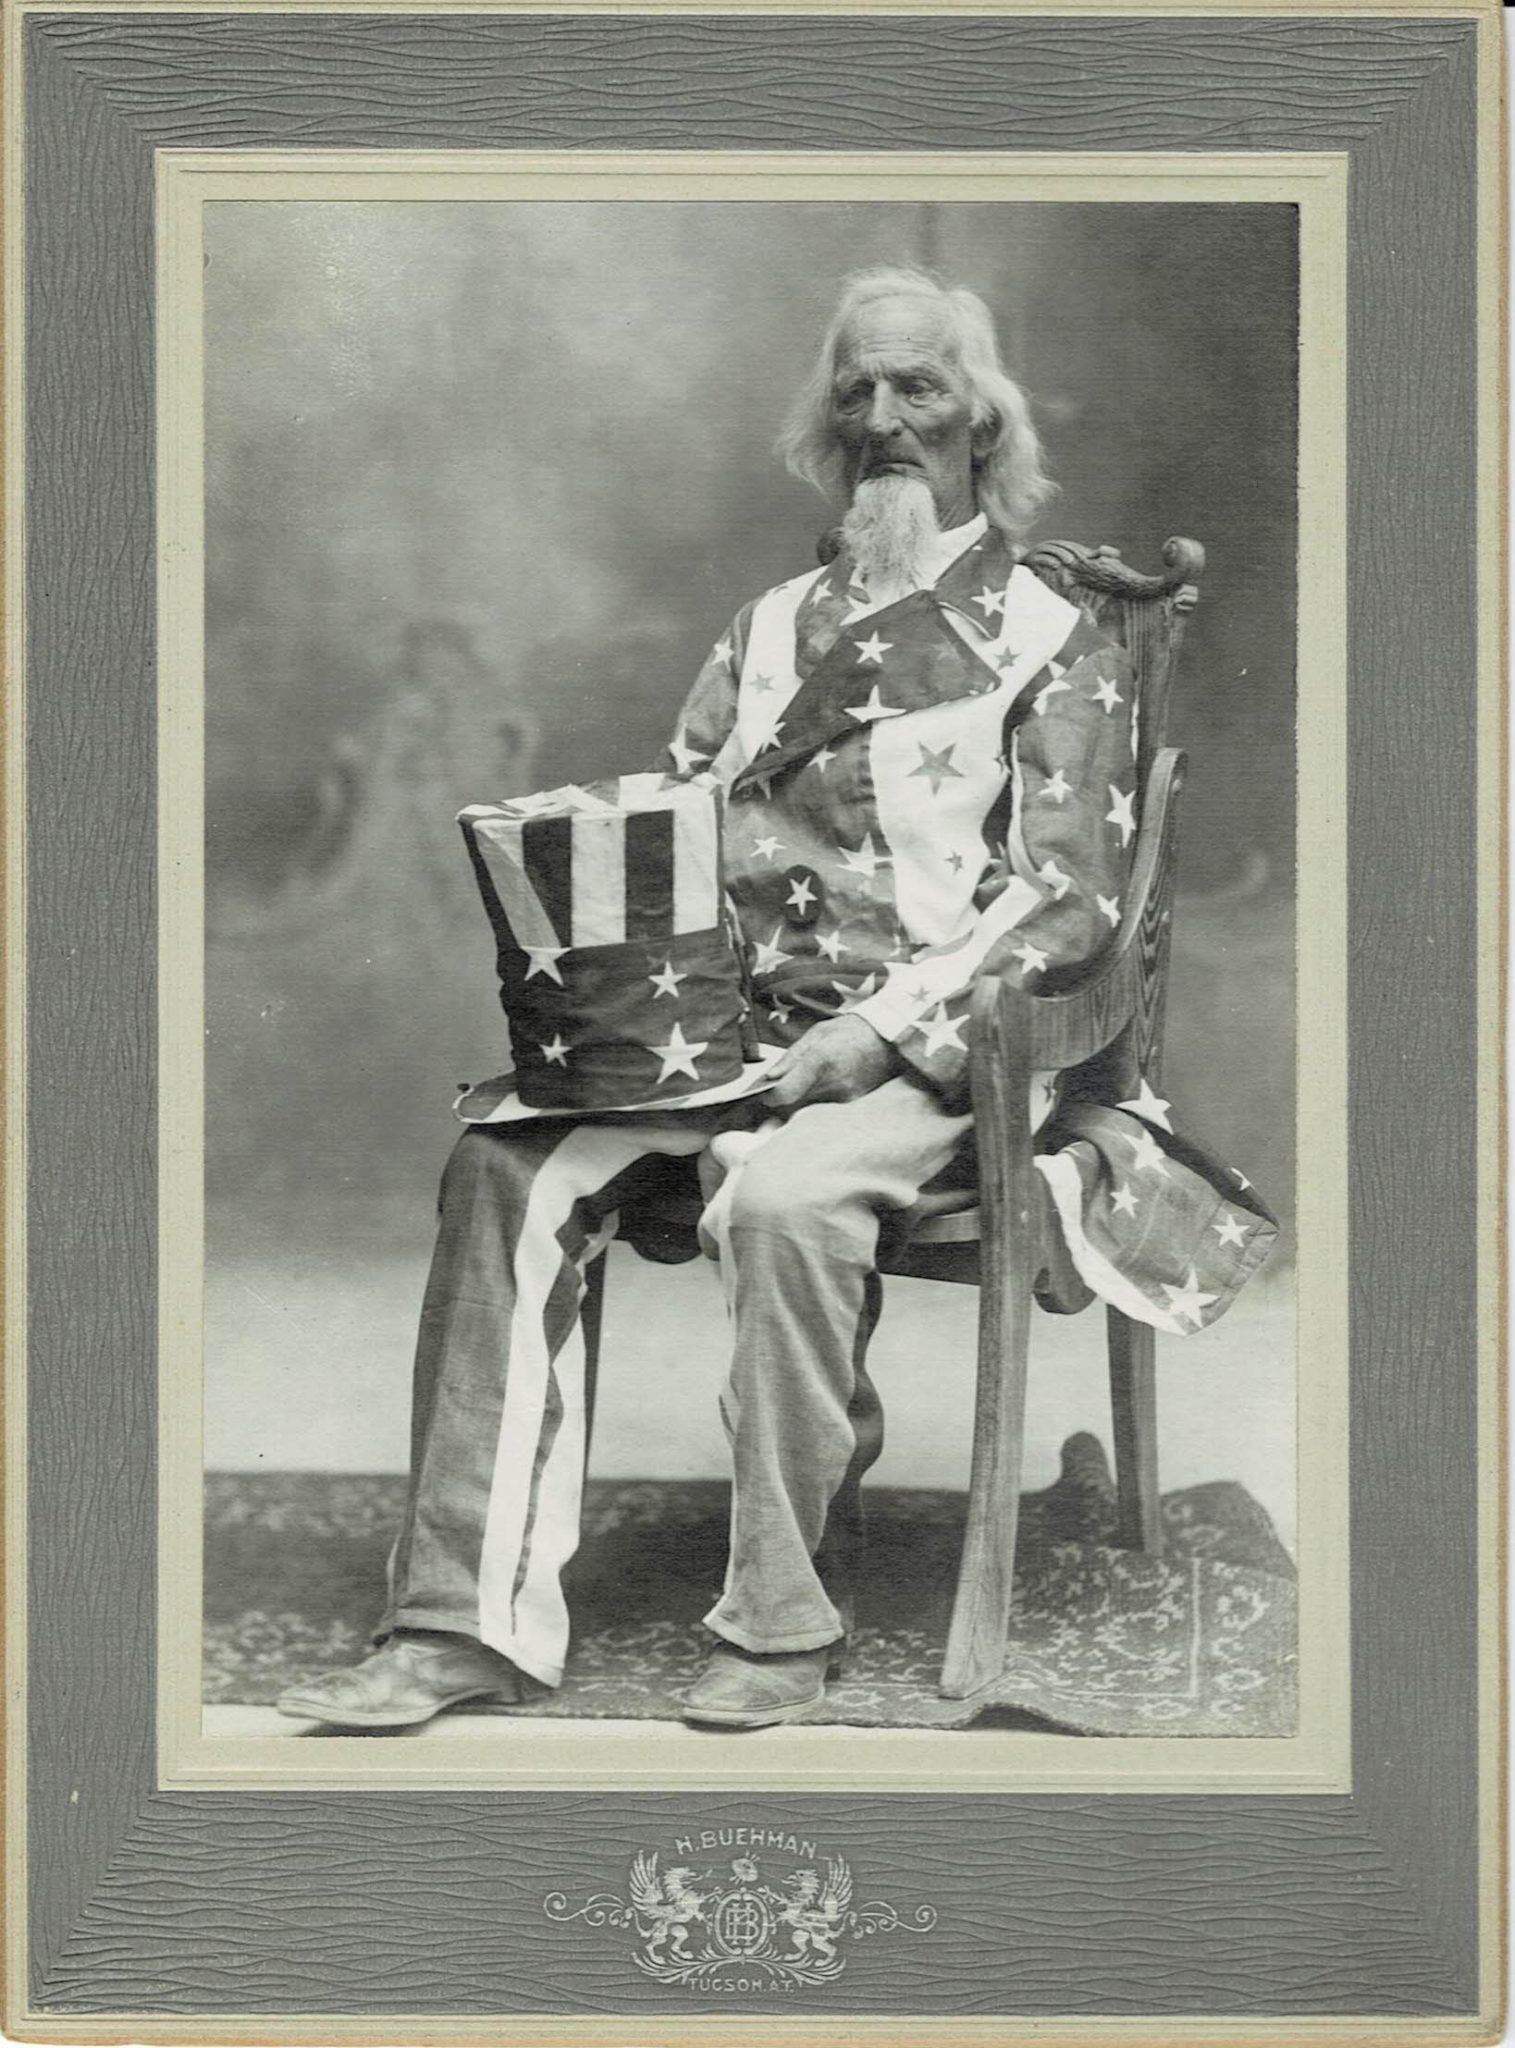 William Smith dressed as Uncle Sam (seated, Henry Buehman Tucson A.T. Photographer)